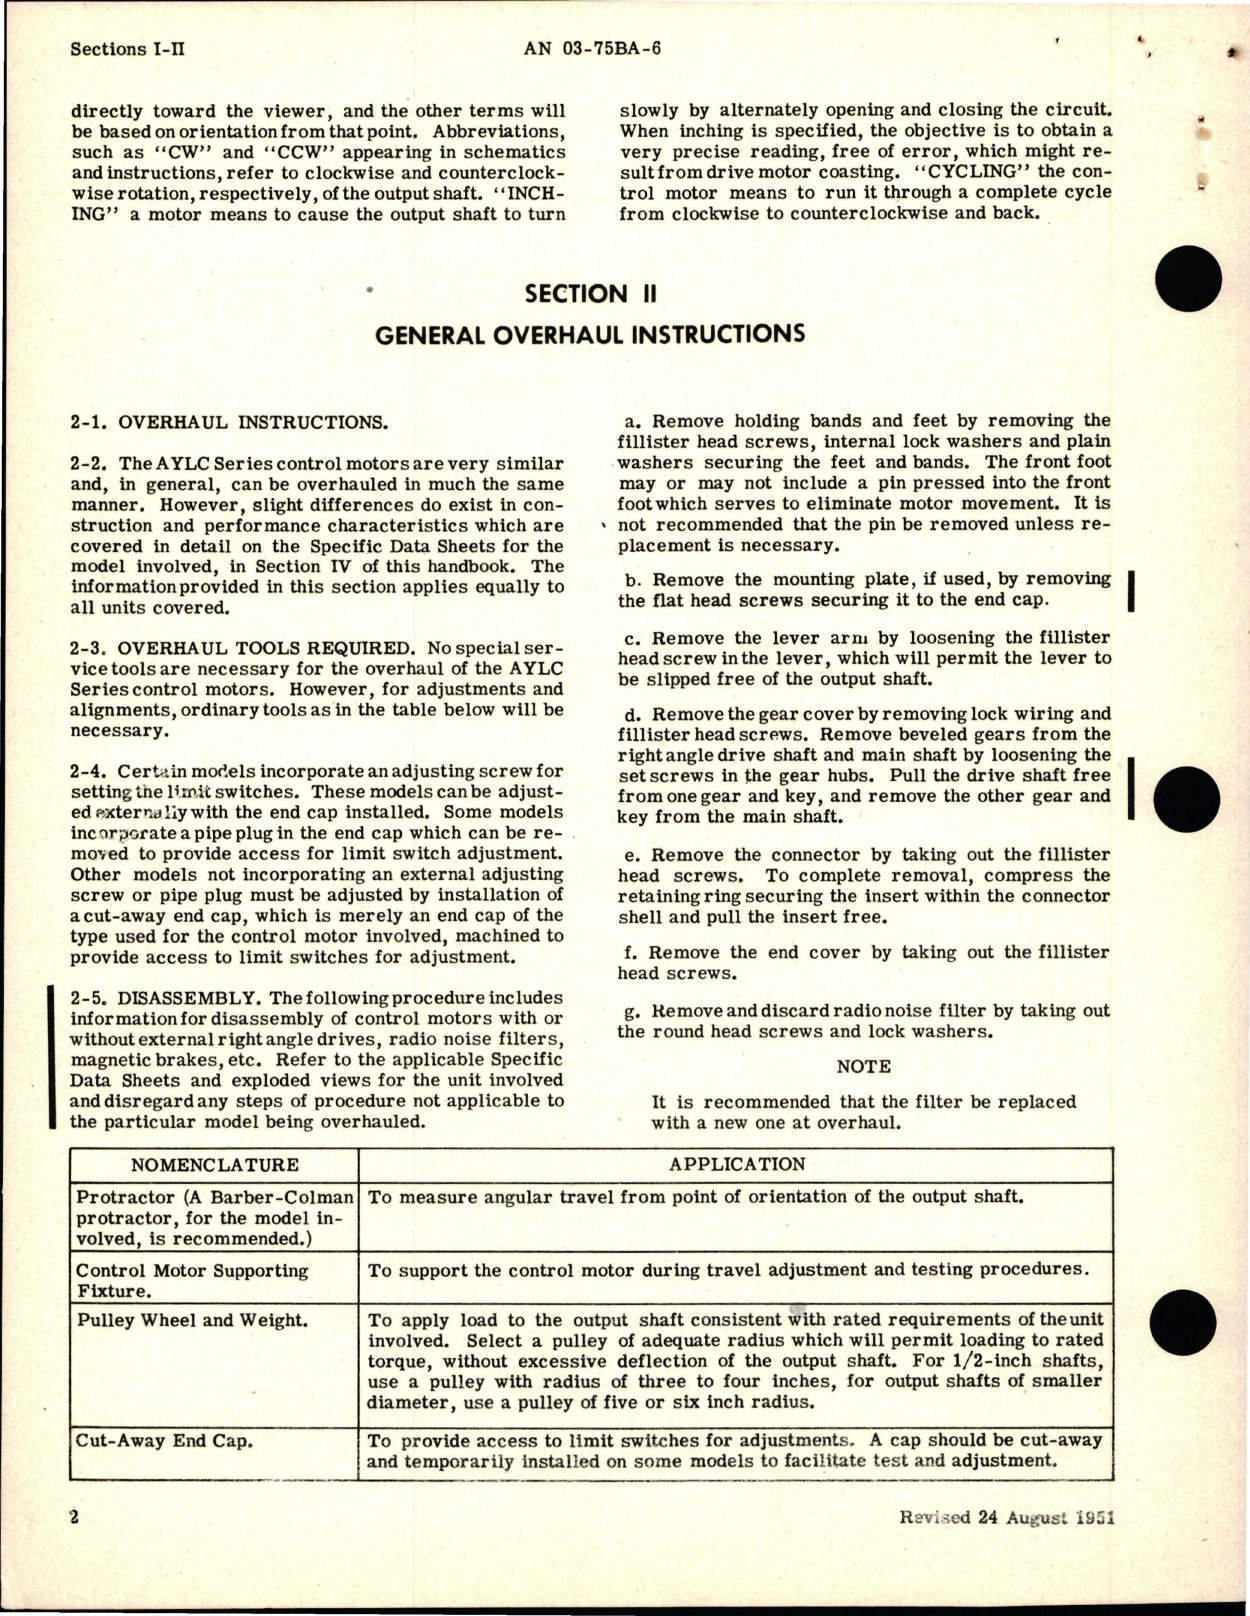 Sample page 6 from AirCorps Library document: Overhaul Instructions for Control Motors, Part AYLC Series 